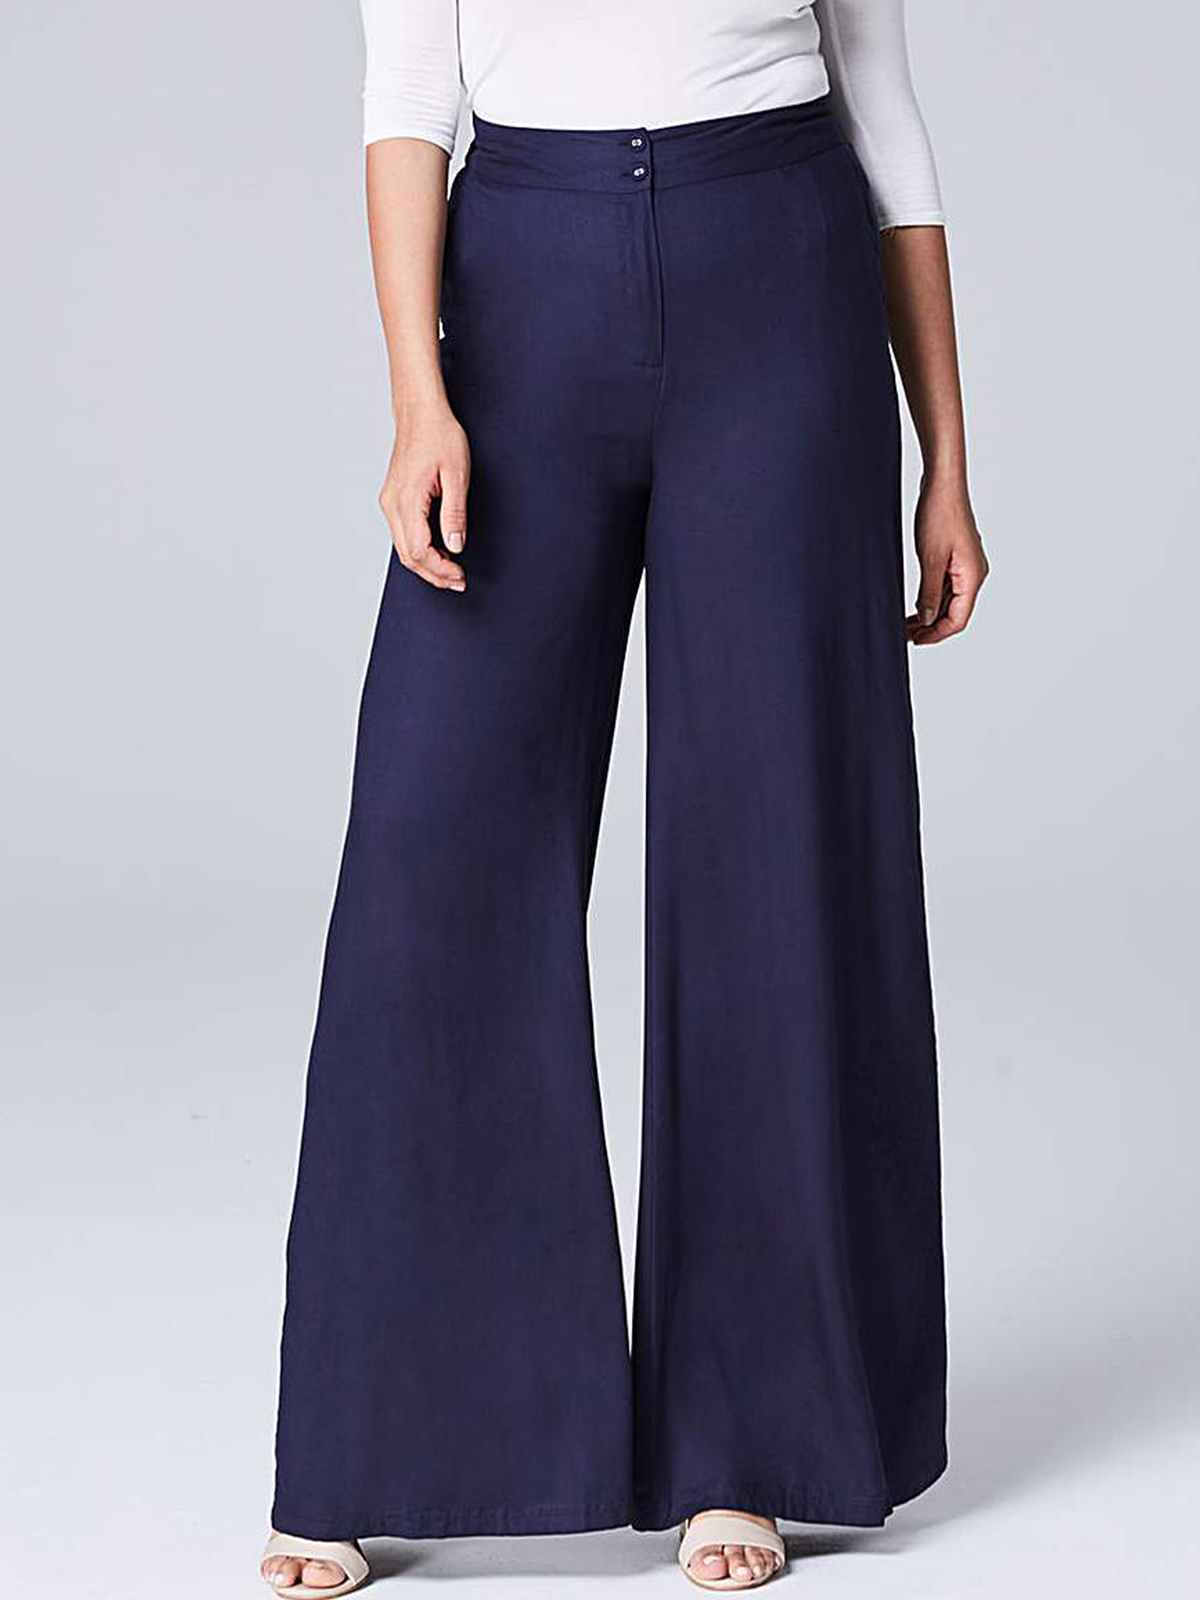 Capsule Capsule Navy Super Wide Leg Trousers Size 10 To 32